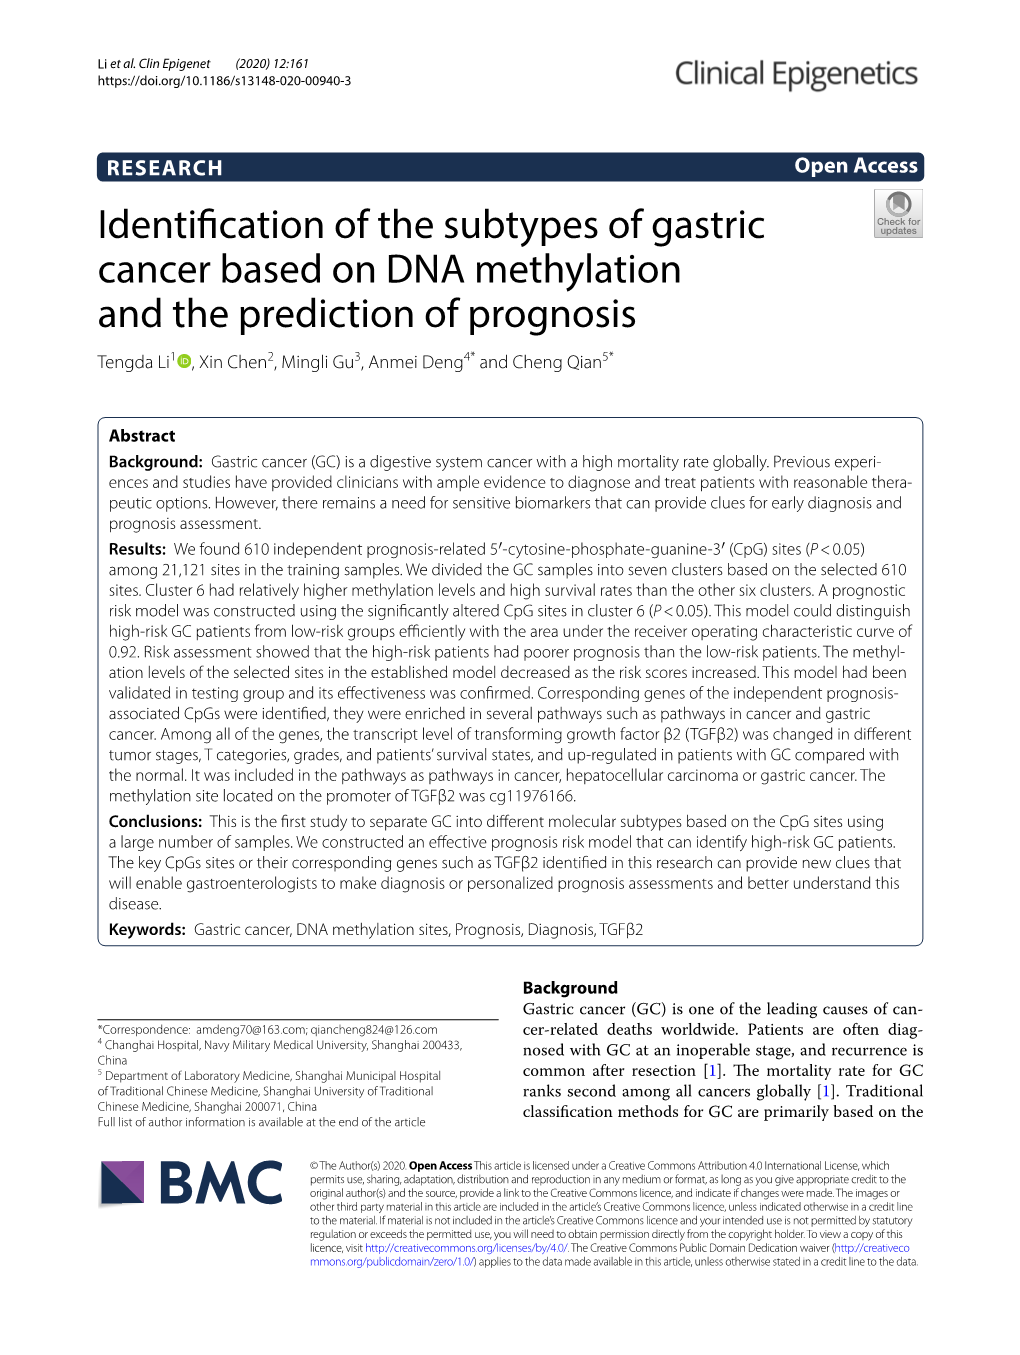 Identification of the Subtypes of Gastric Cancer Based on DNA Methylation and the Prediction of Prognosis